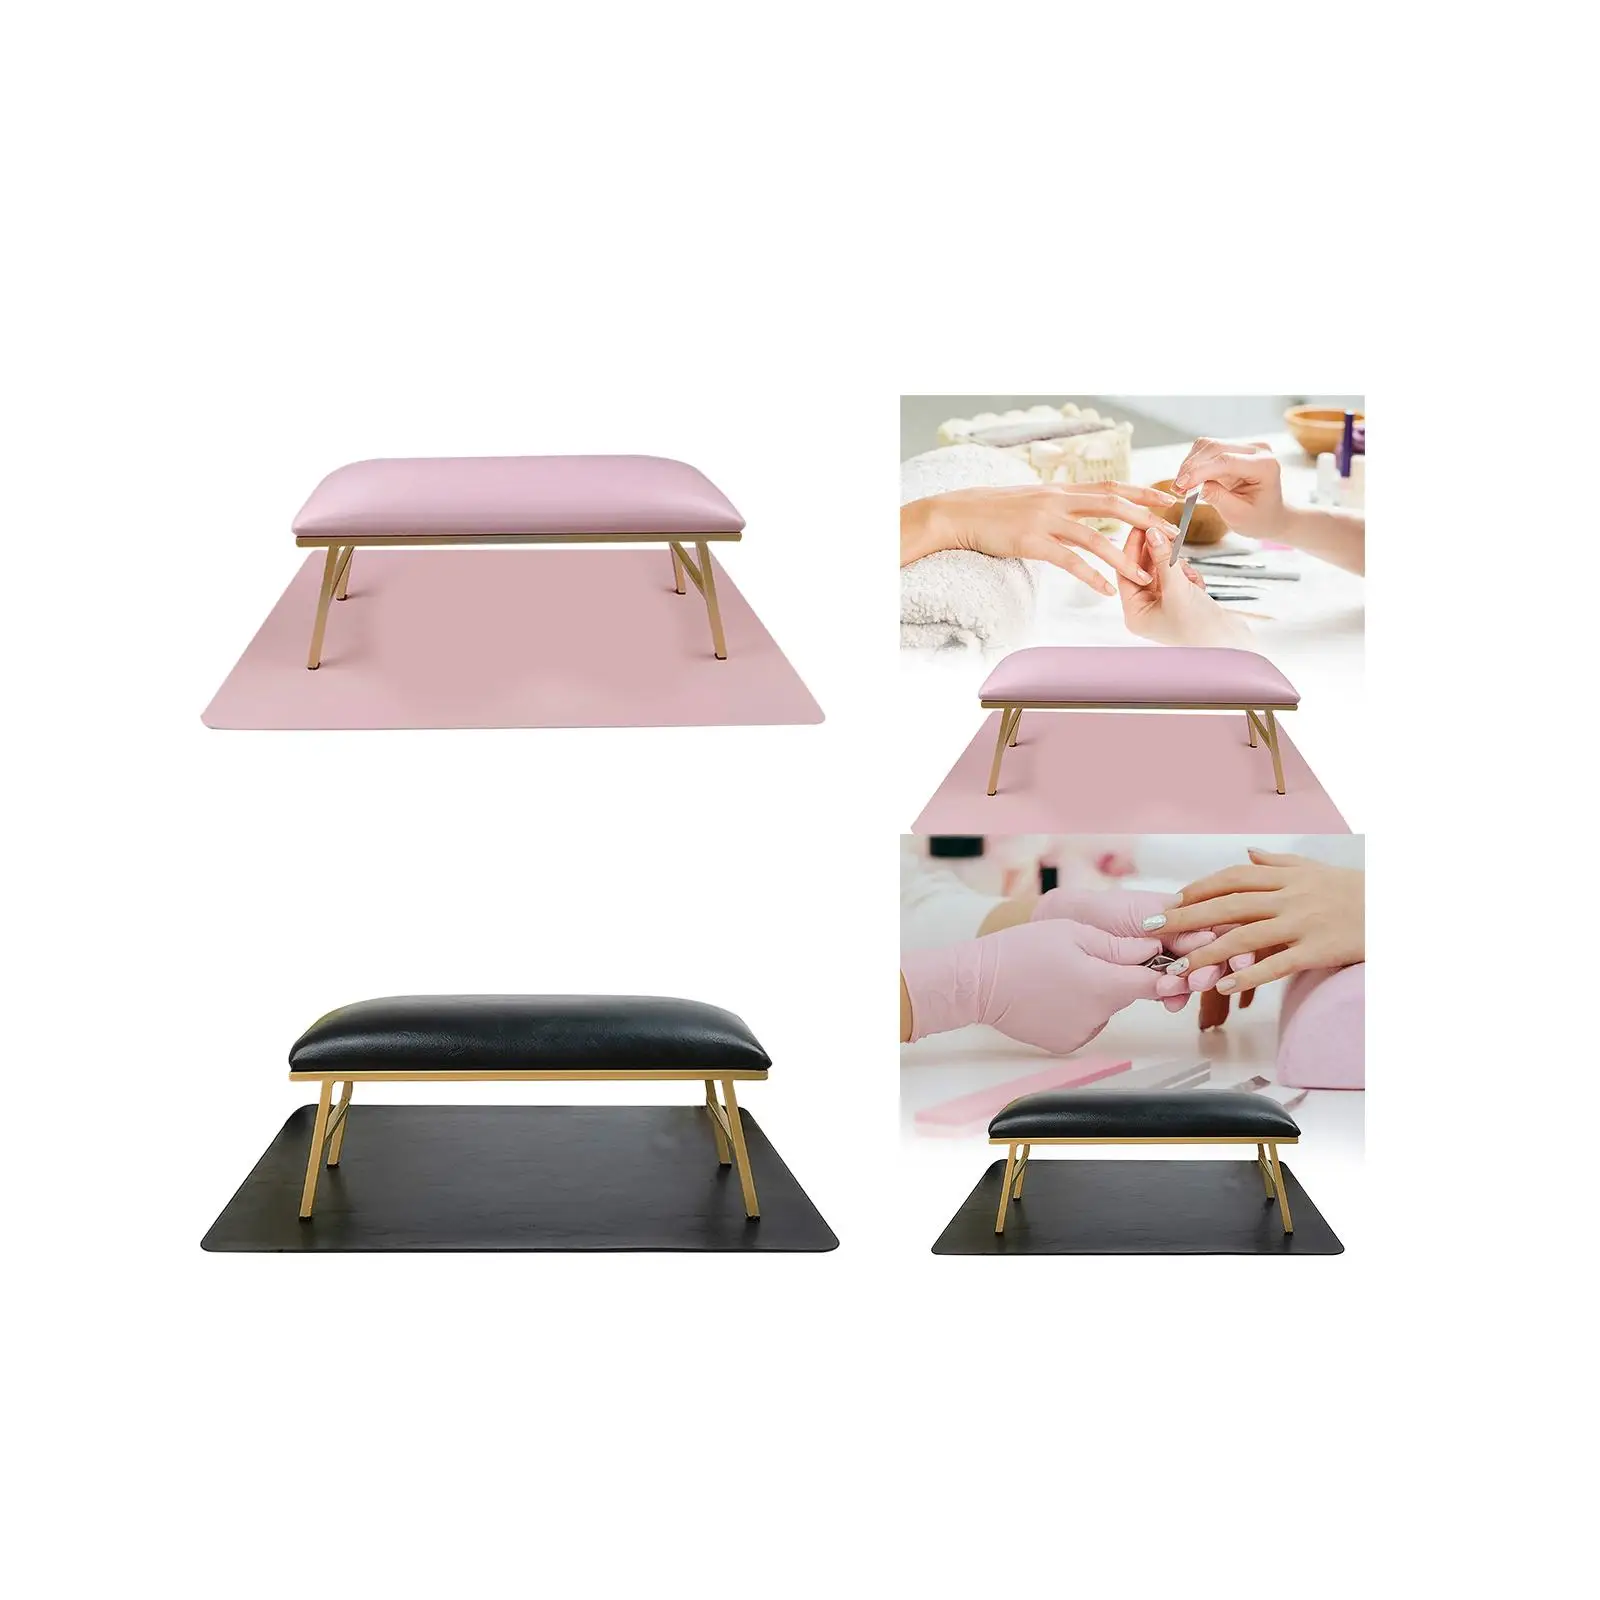 Nail Hand Pillow and Table Mat Set PU Leather Professional Comfortable Desk Nail Arm Rest Cushion Hand Cushion for Home Arm Nail